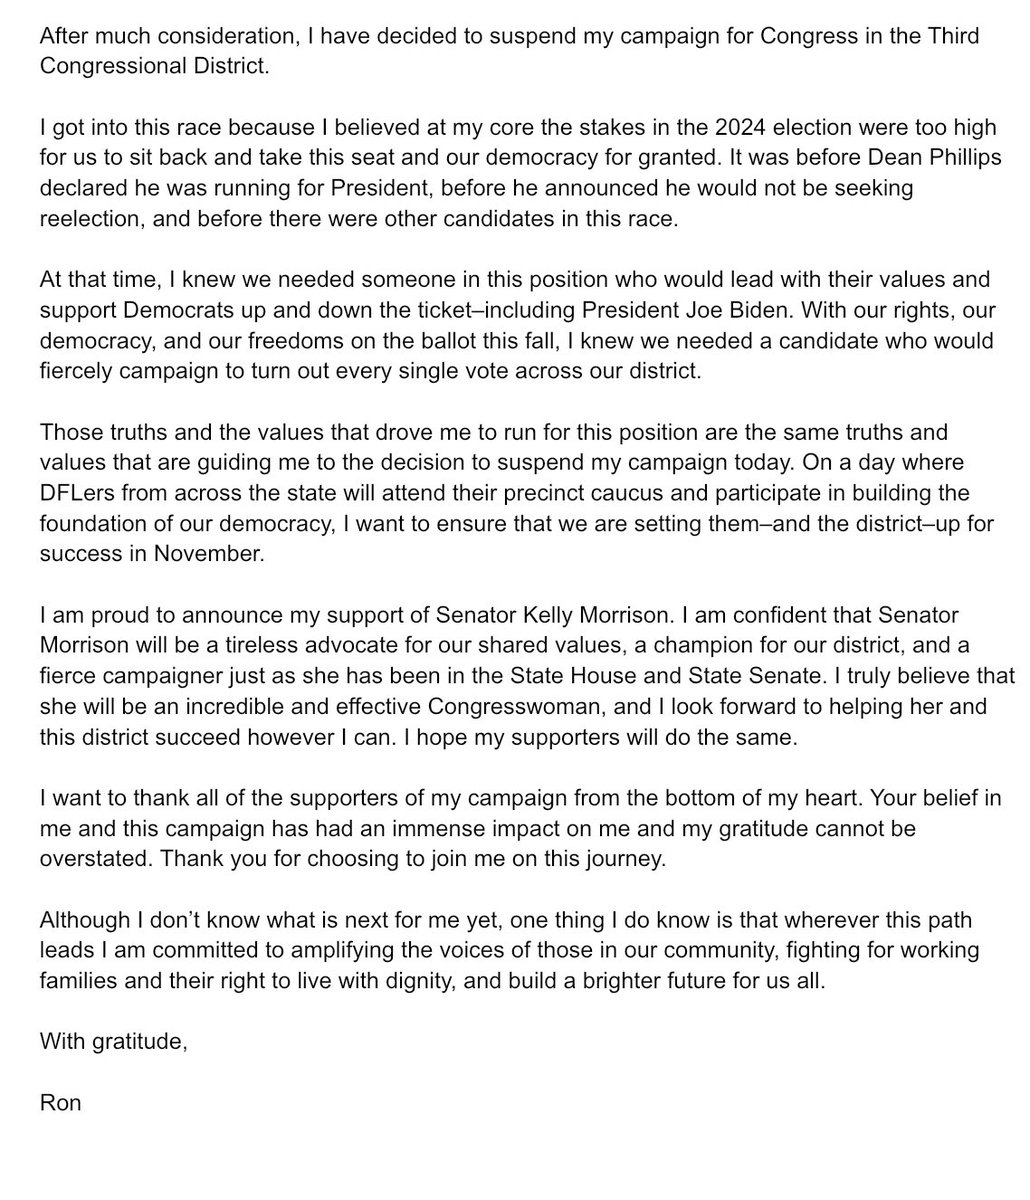 What a journey! After much consideration, I have decided to suspend my campaign for Congress in Minnesota’s Third Congressional District. I could not be more grateful for the support, encouragement, and investment from so many of you. My full statement: